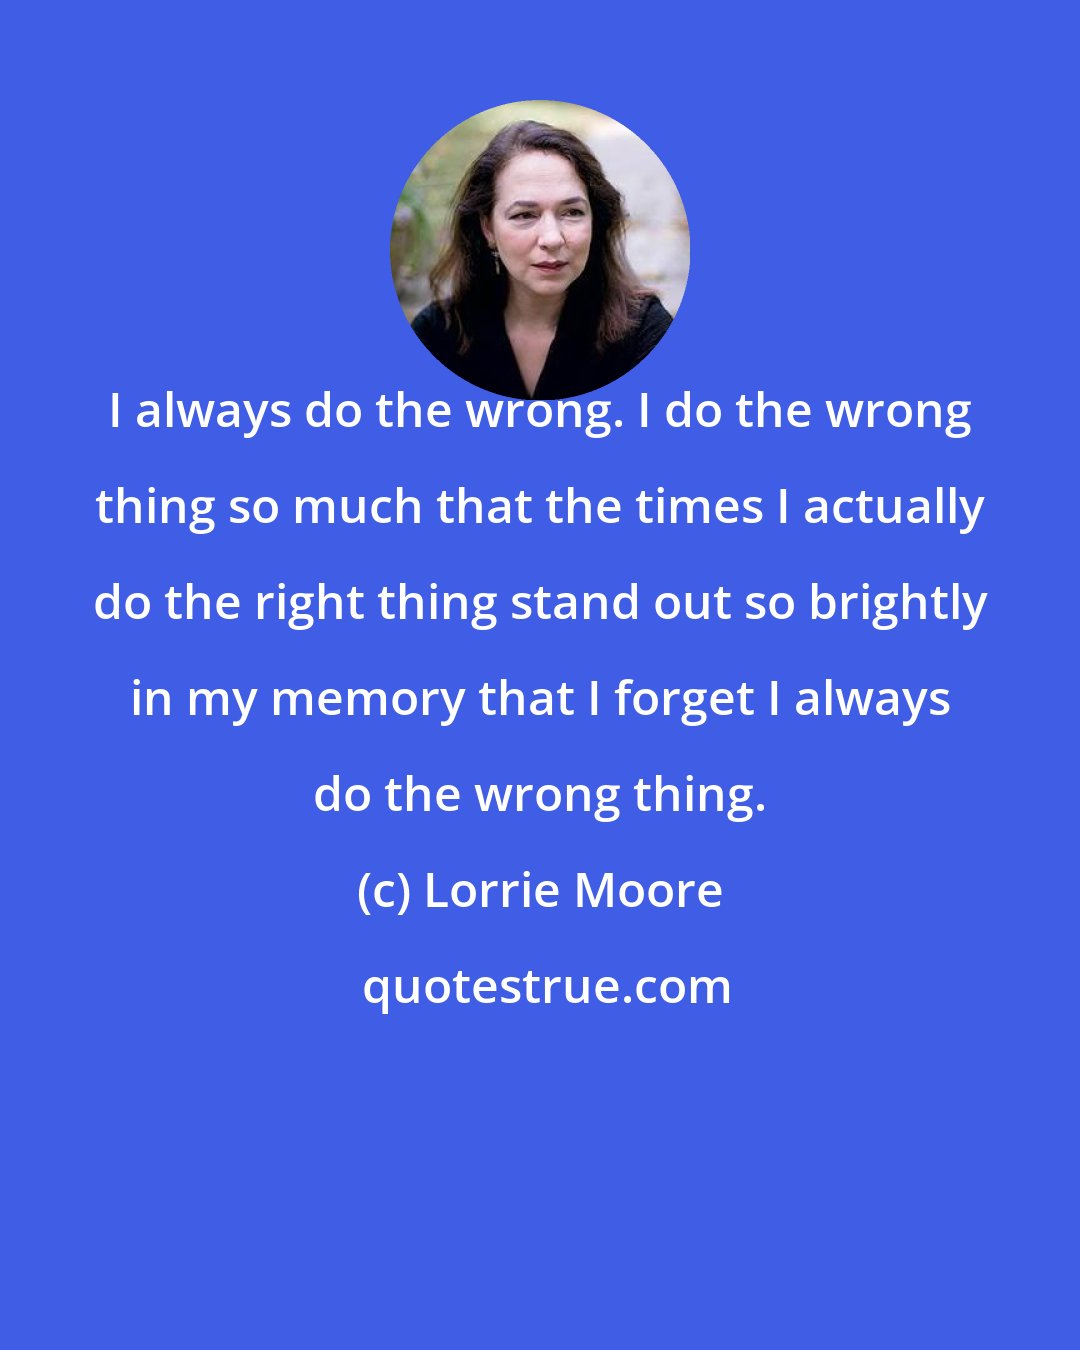 Lorrie Moore: I always do the wrong. I do the wrong thing so much that the times I actually do the right thing stand out so brightly in my memory that I forget I always do the wrong thing.